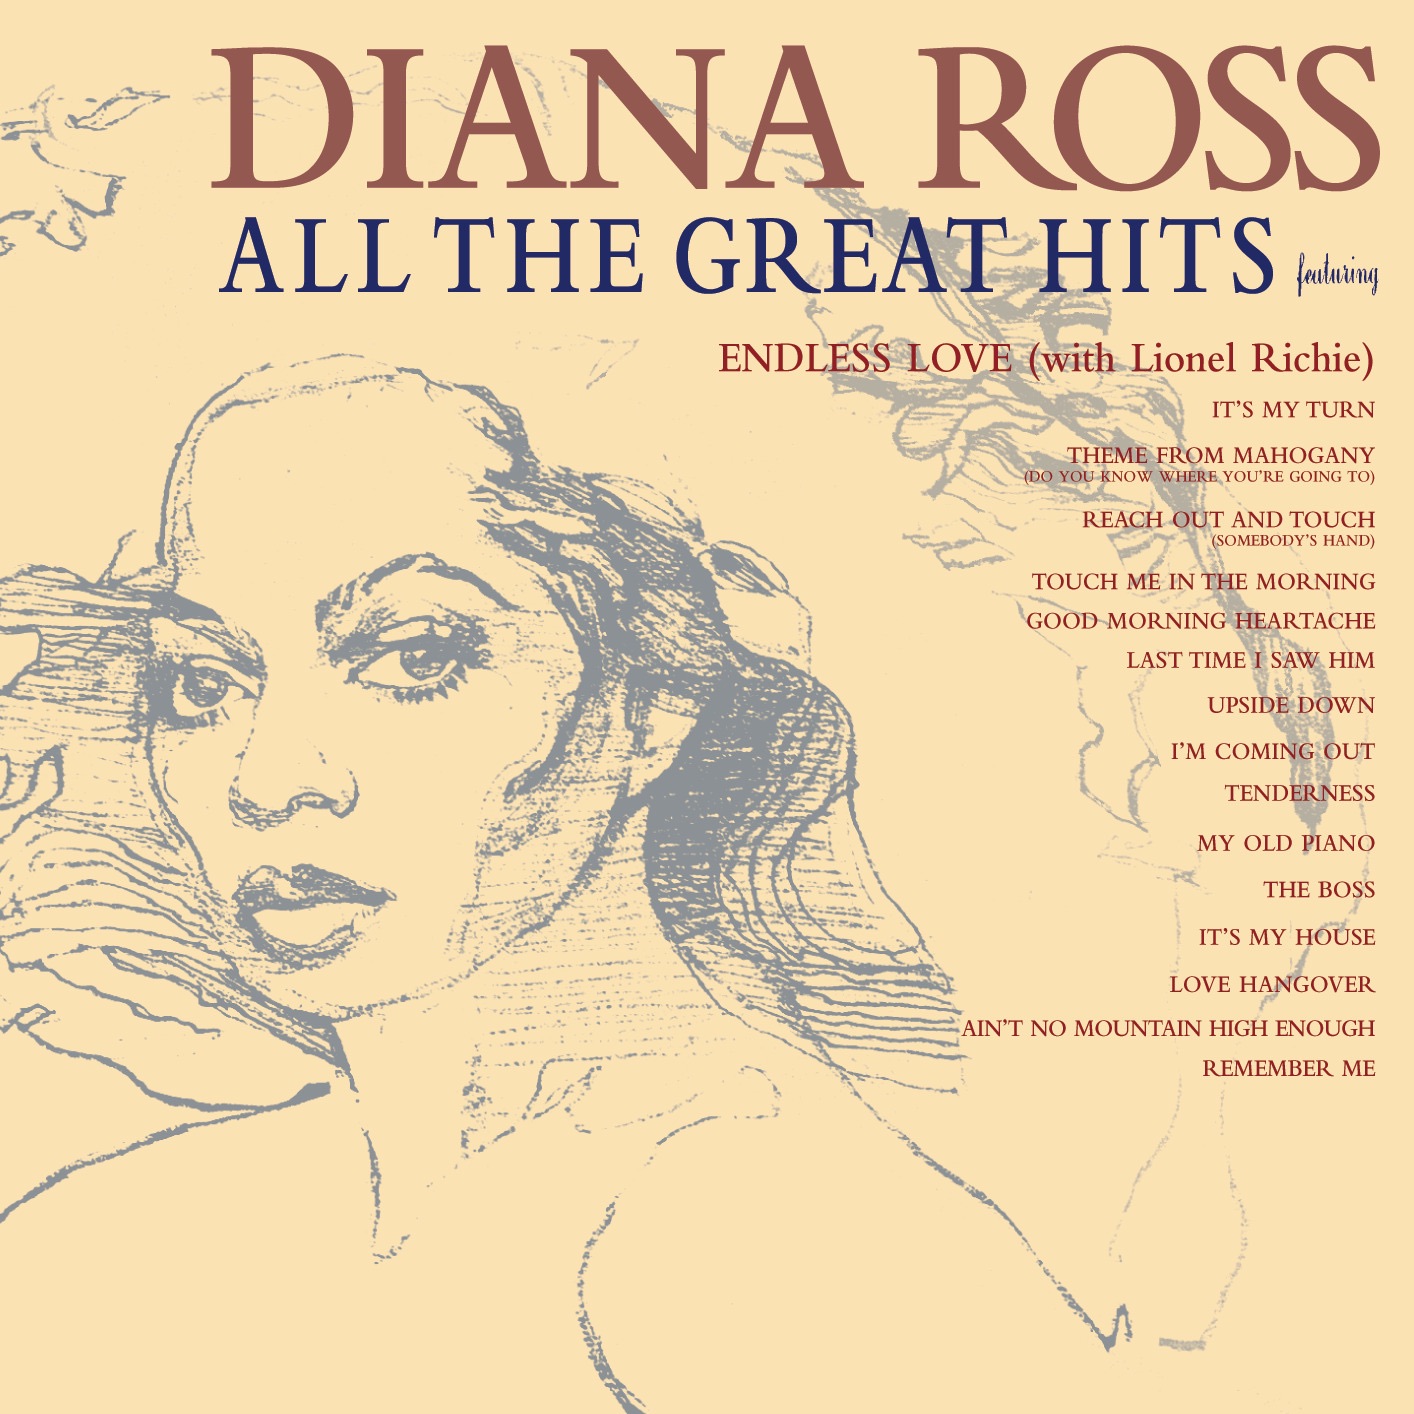 Art for Reach Out And Touch (Somebody's Hand) by Diana Ross